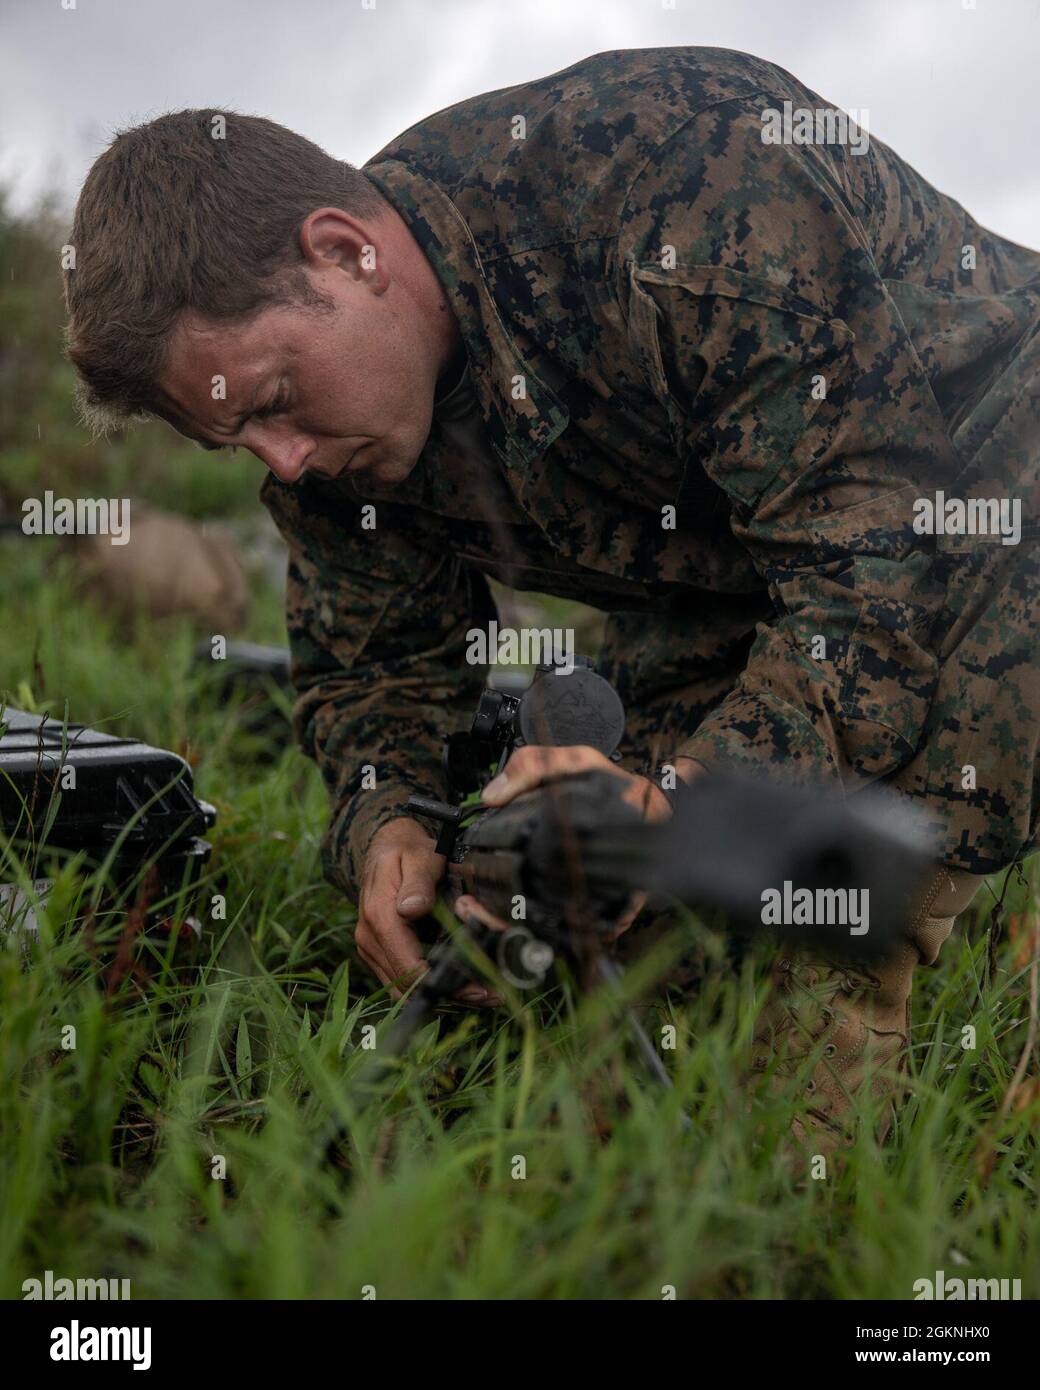 A Marine with 3rd Force Reconnaissance Company, 4th Marine Division, assembles his rifle during sniper training at Camp Shelby, Mississippi, on June 6, 2021. The Marines trained with the M107 semi-automatic long-range sniper rifle, an anti-materiel rifle that fires .50 caliber ammunition out to a maximum effective range of 2000 meters. Stock Photo